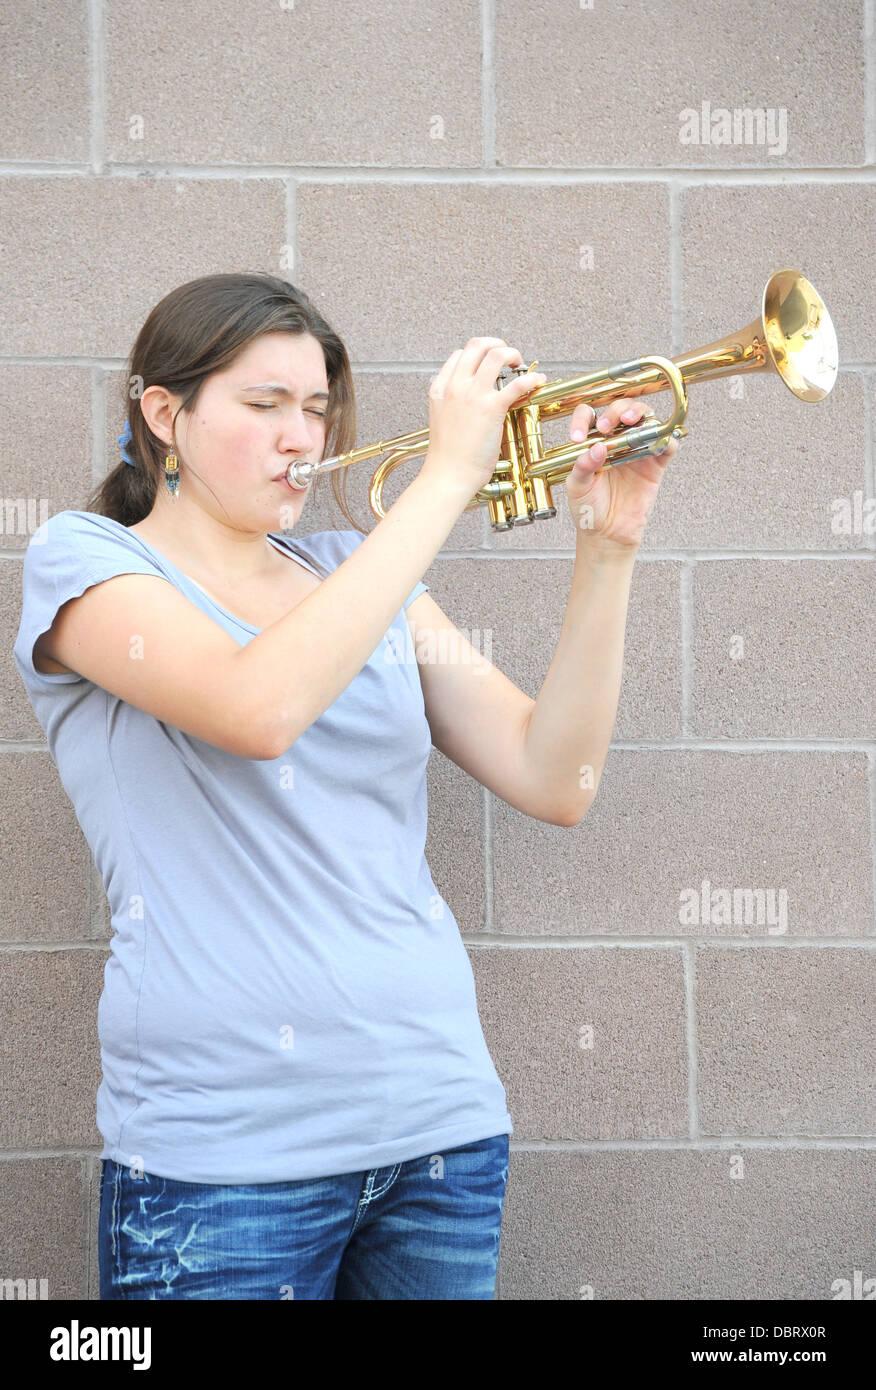 Female blowing her trumpet. Stock Photo